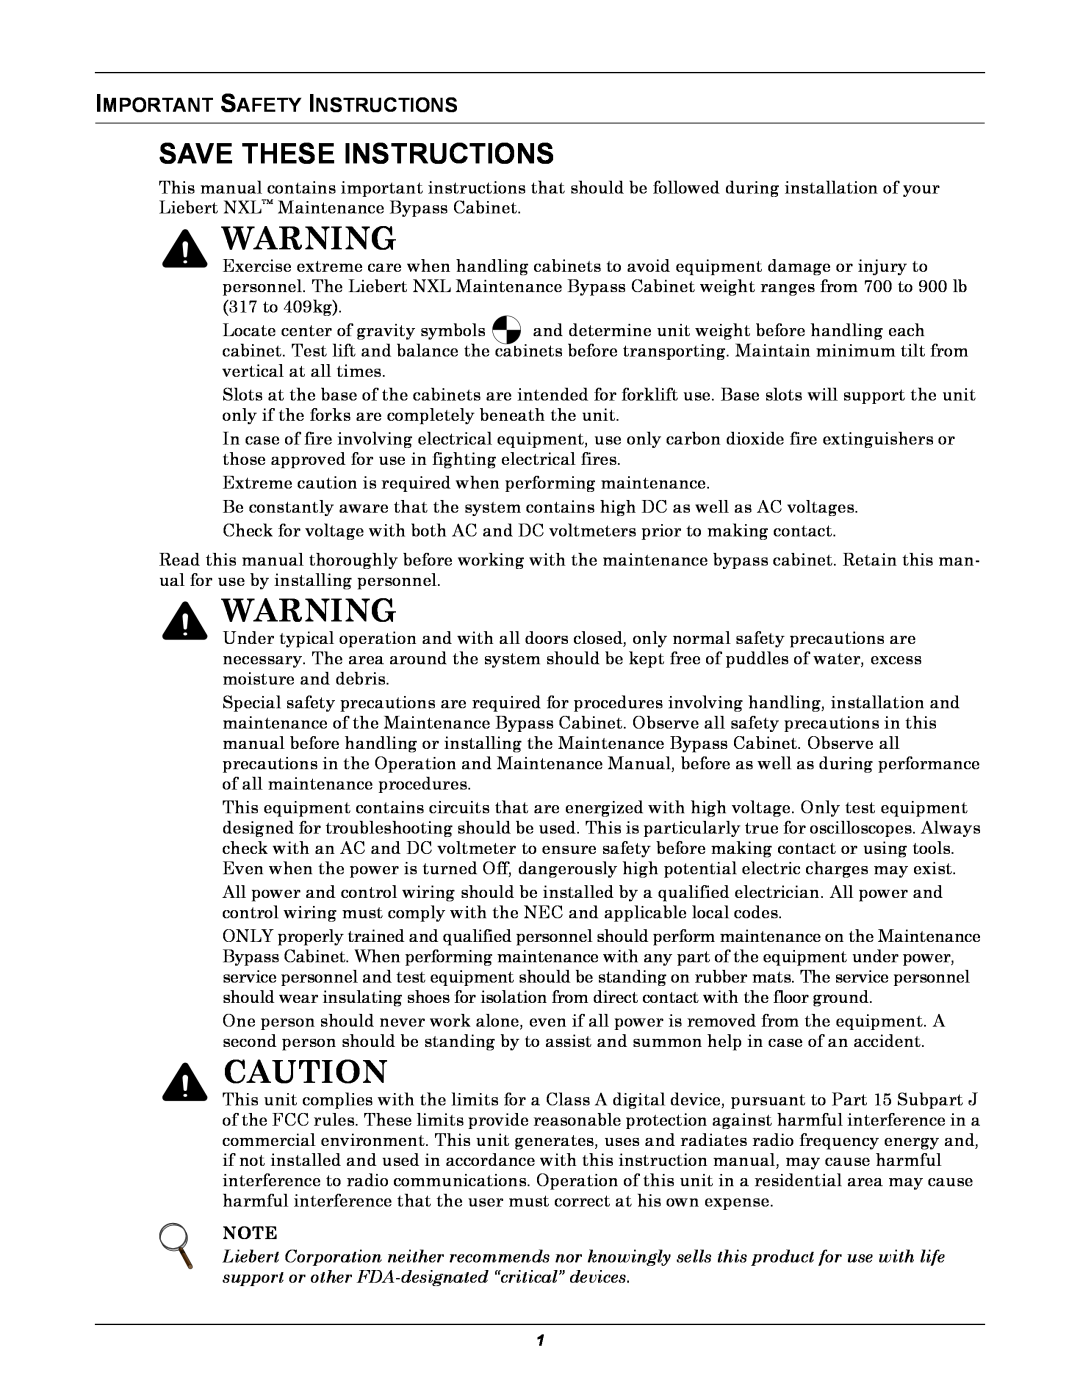 Emerson UPS Systems installation manual Save These Instructions, Important Safety Instructions 